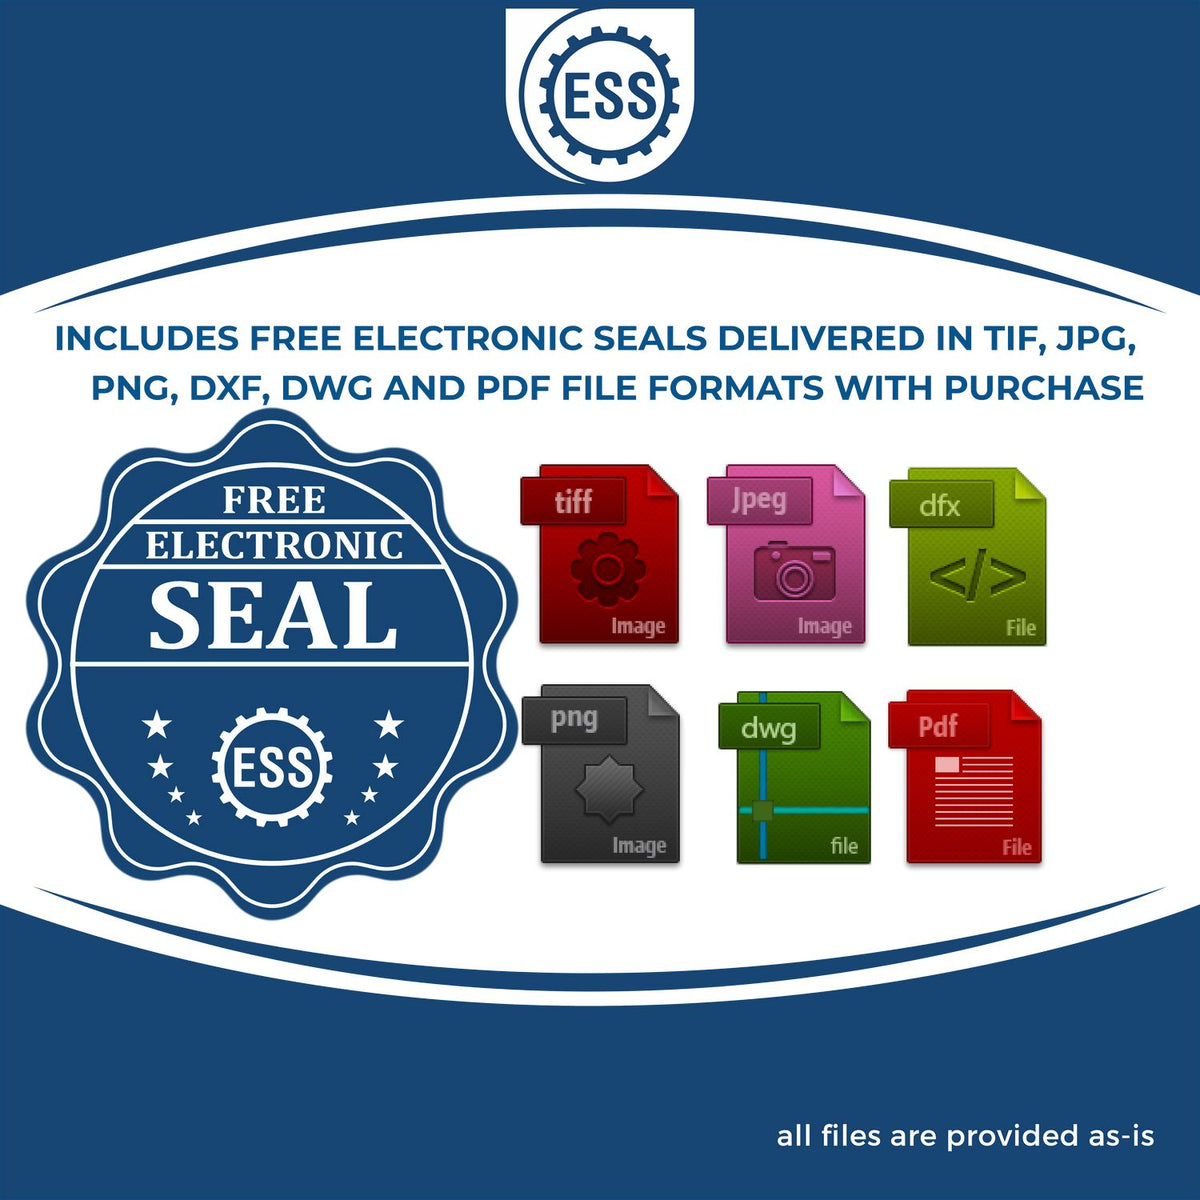 An infographic for the free electronic seal for the Gift Nevada Land Surveyor Seal illustrating the different file type icons such as DXF, DWG, TIF, JPG and PNG.